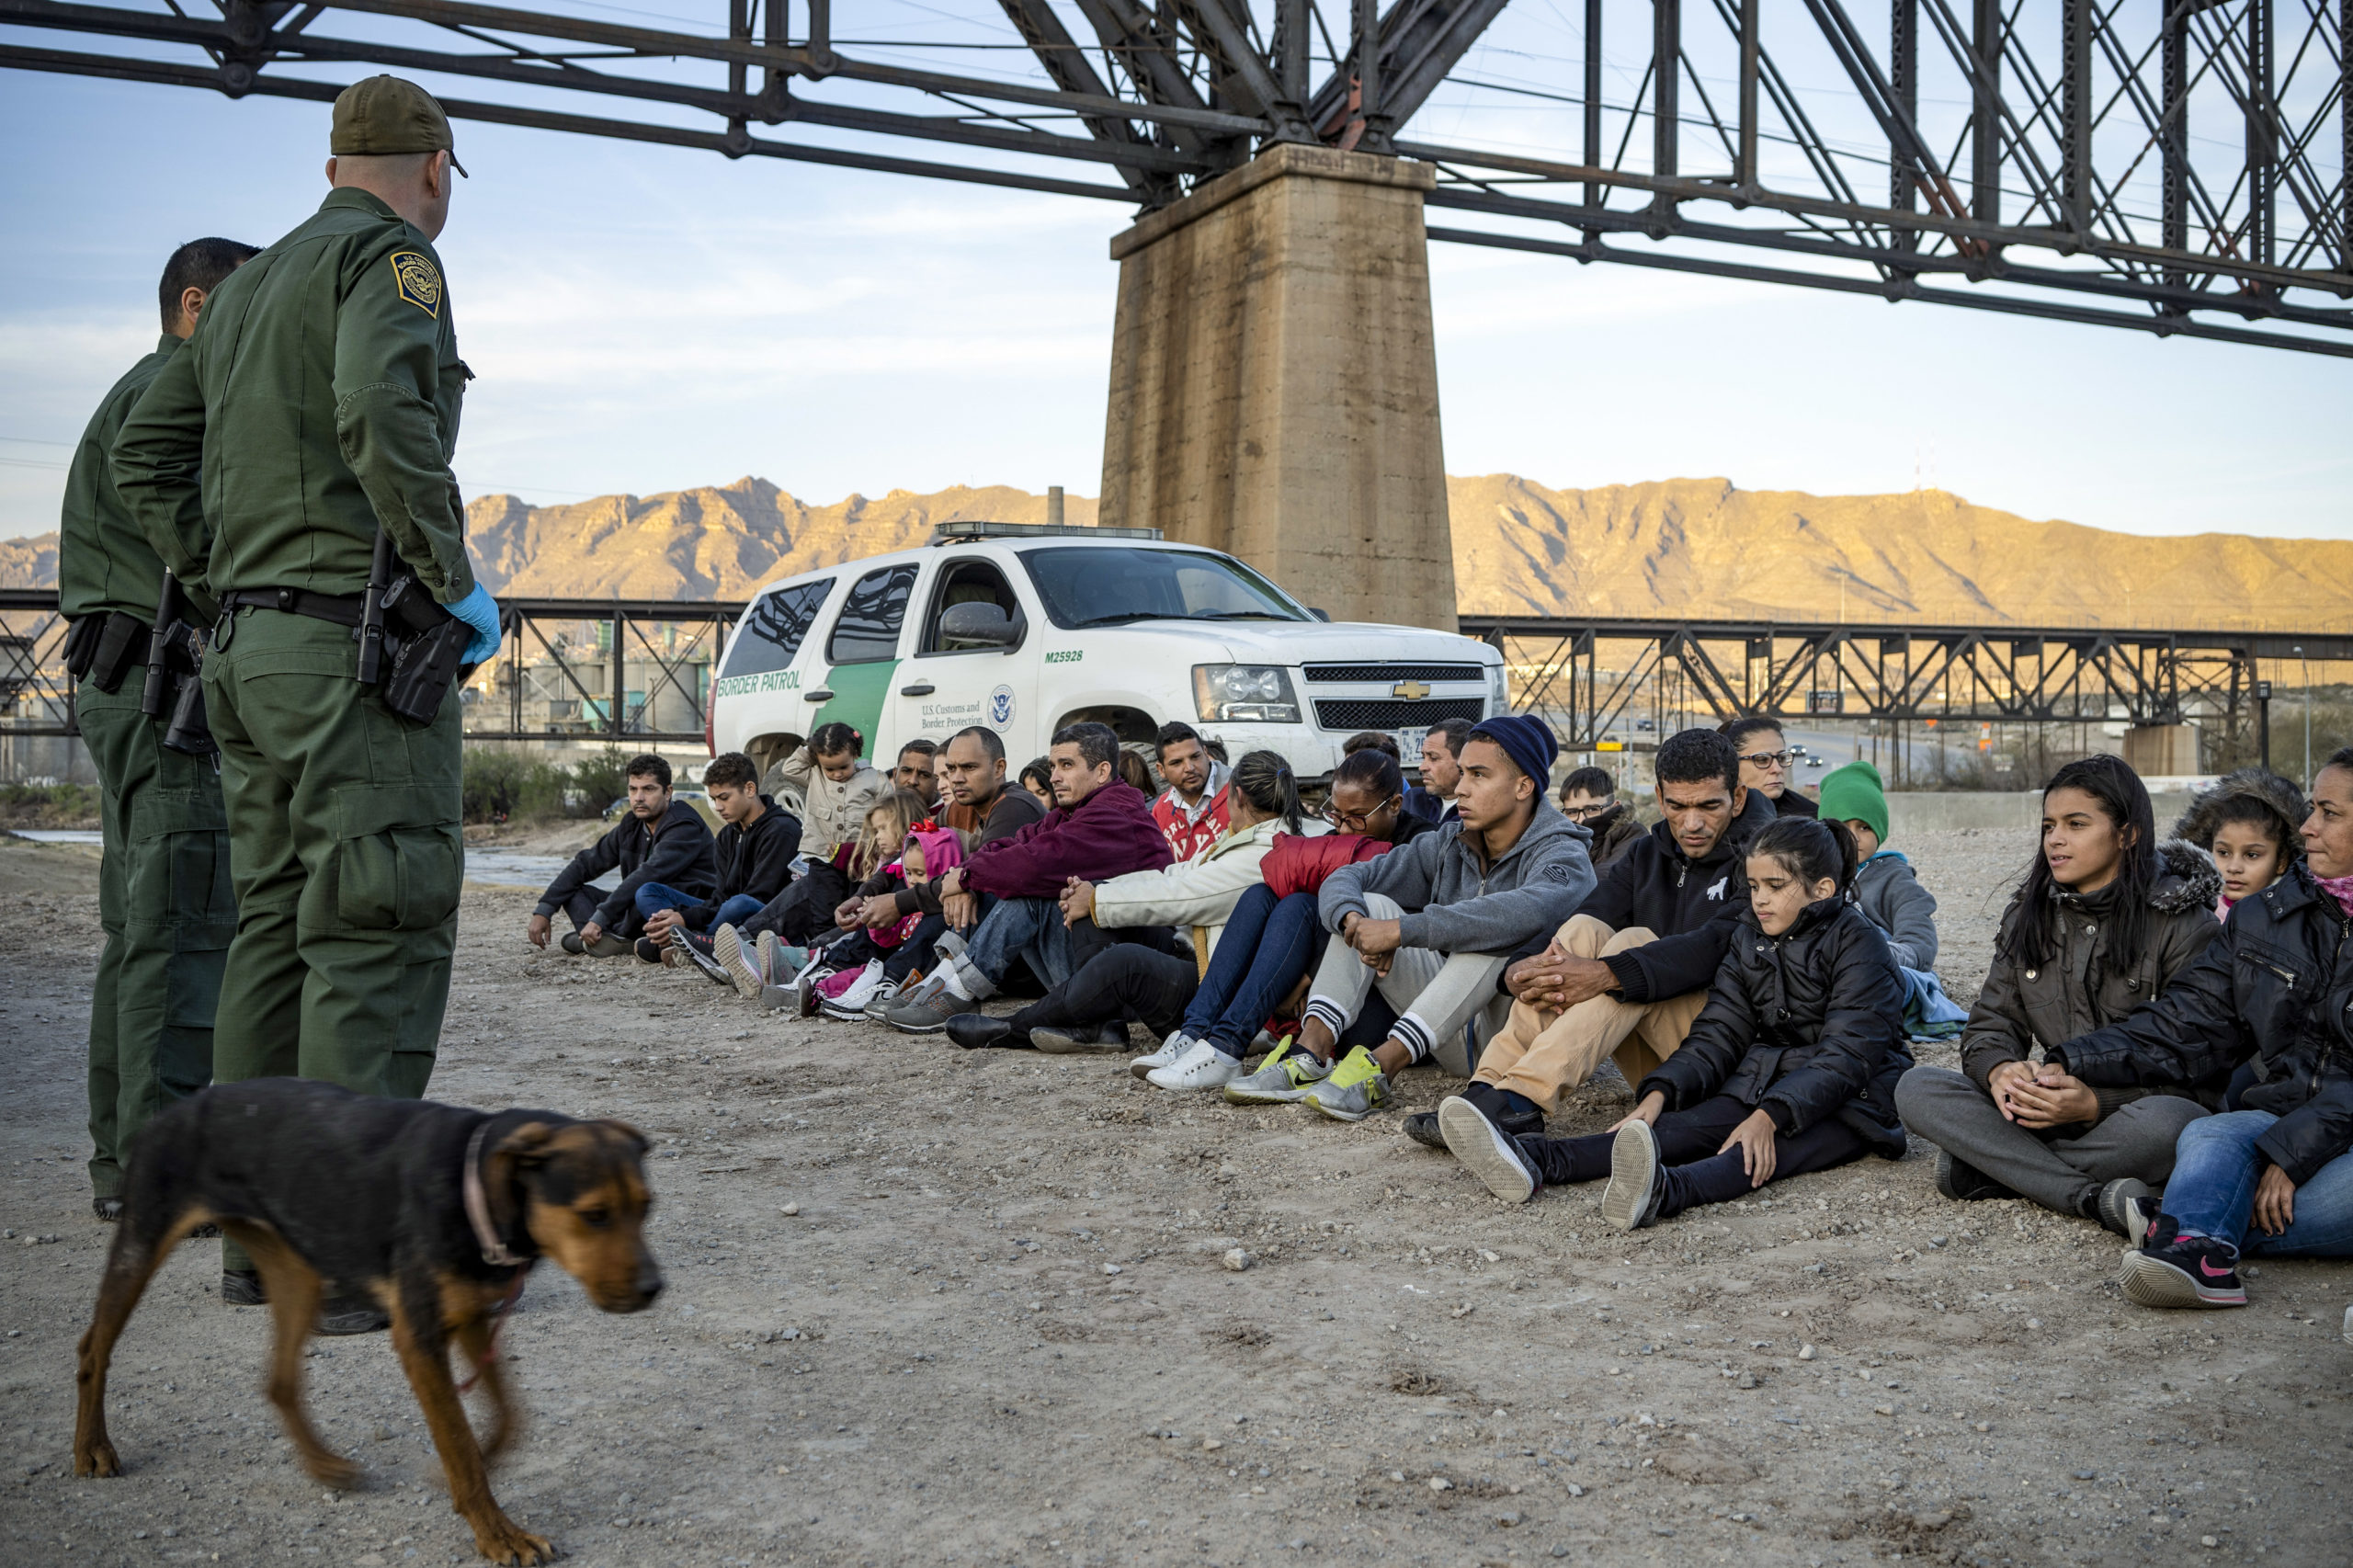 TOPSHOT - A group of about 30 Brazilian migrants, who had just crossed the border, sit on the ground near US Border Patrol agents, on the property of Jeff Allen, who used to run a brick factory near Mt. Christo Rey on the US-Mexico border in Sunland Park, New Mexico on March 20, 2019. - The militia members say they will patrol the US-Mexico border near Mt. Christo Rey, 